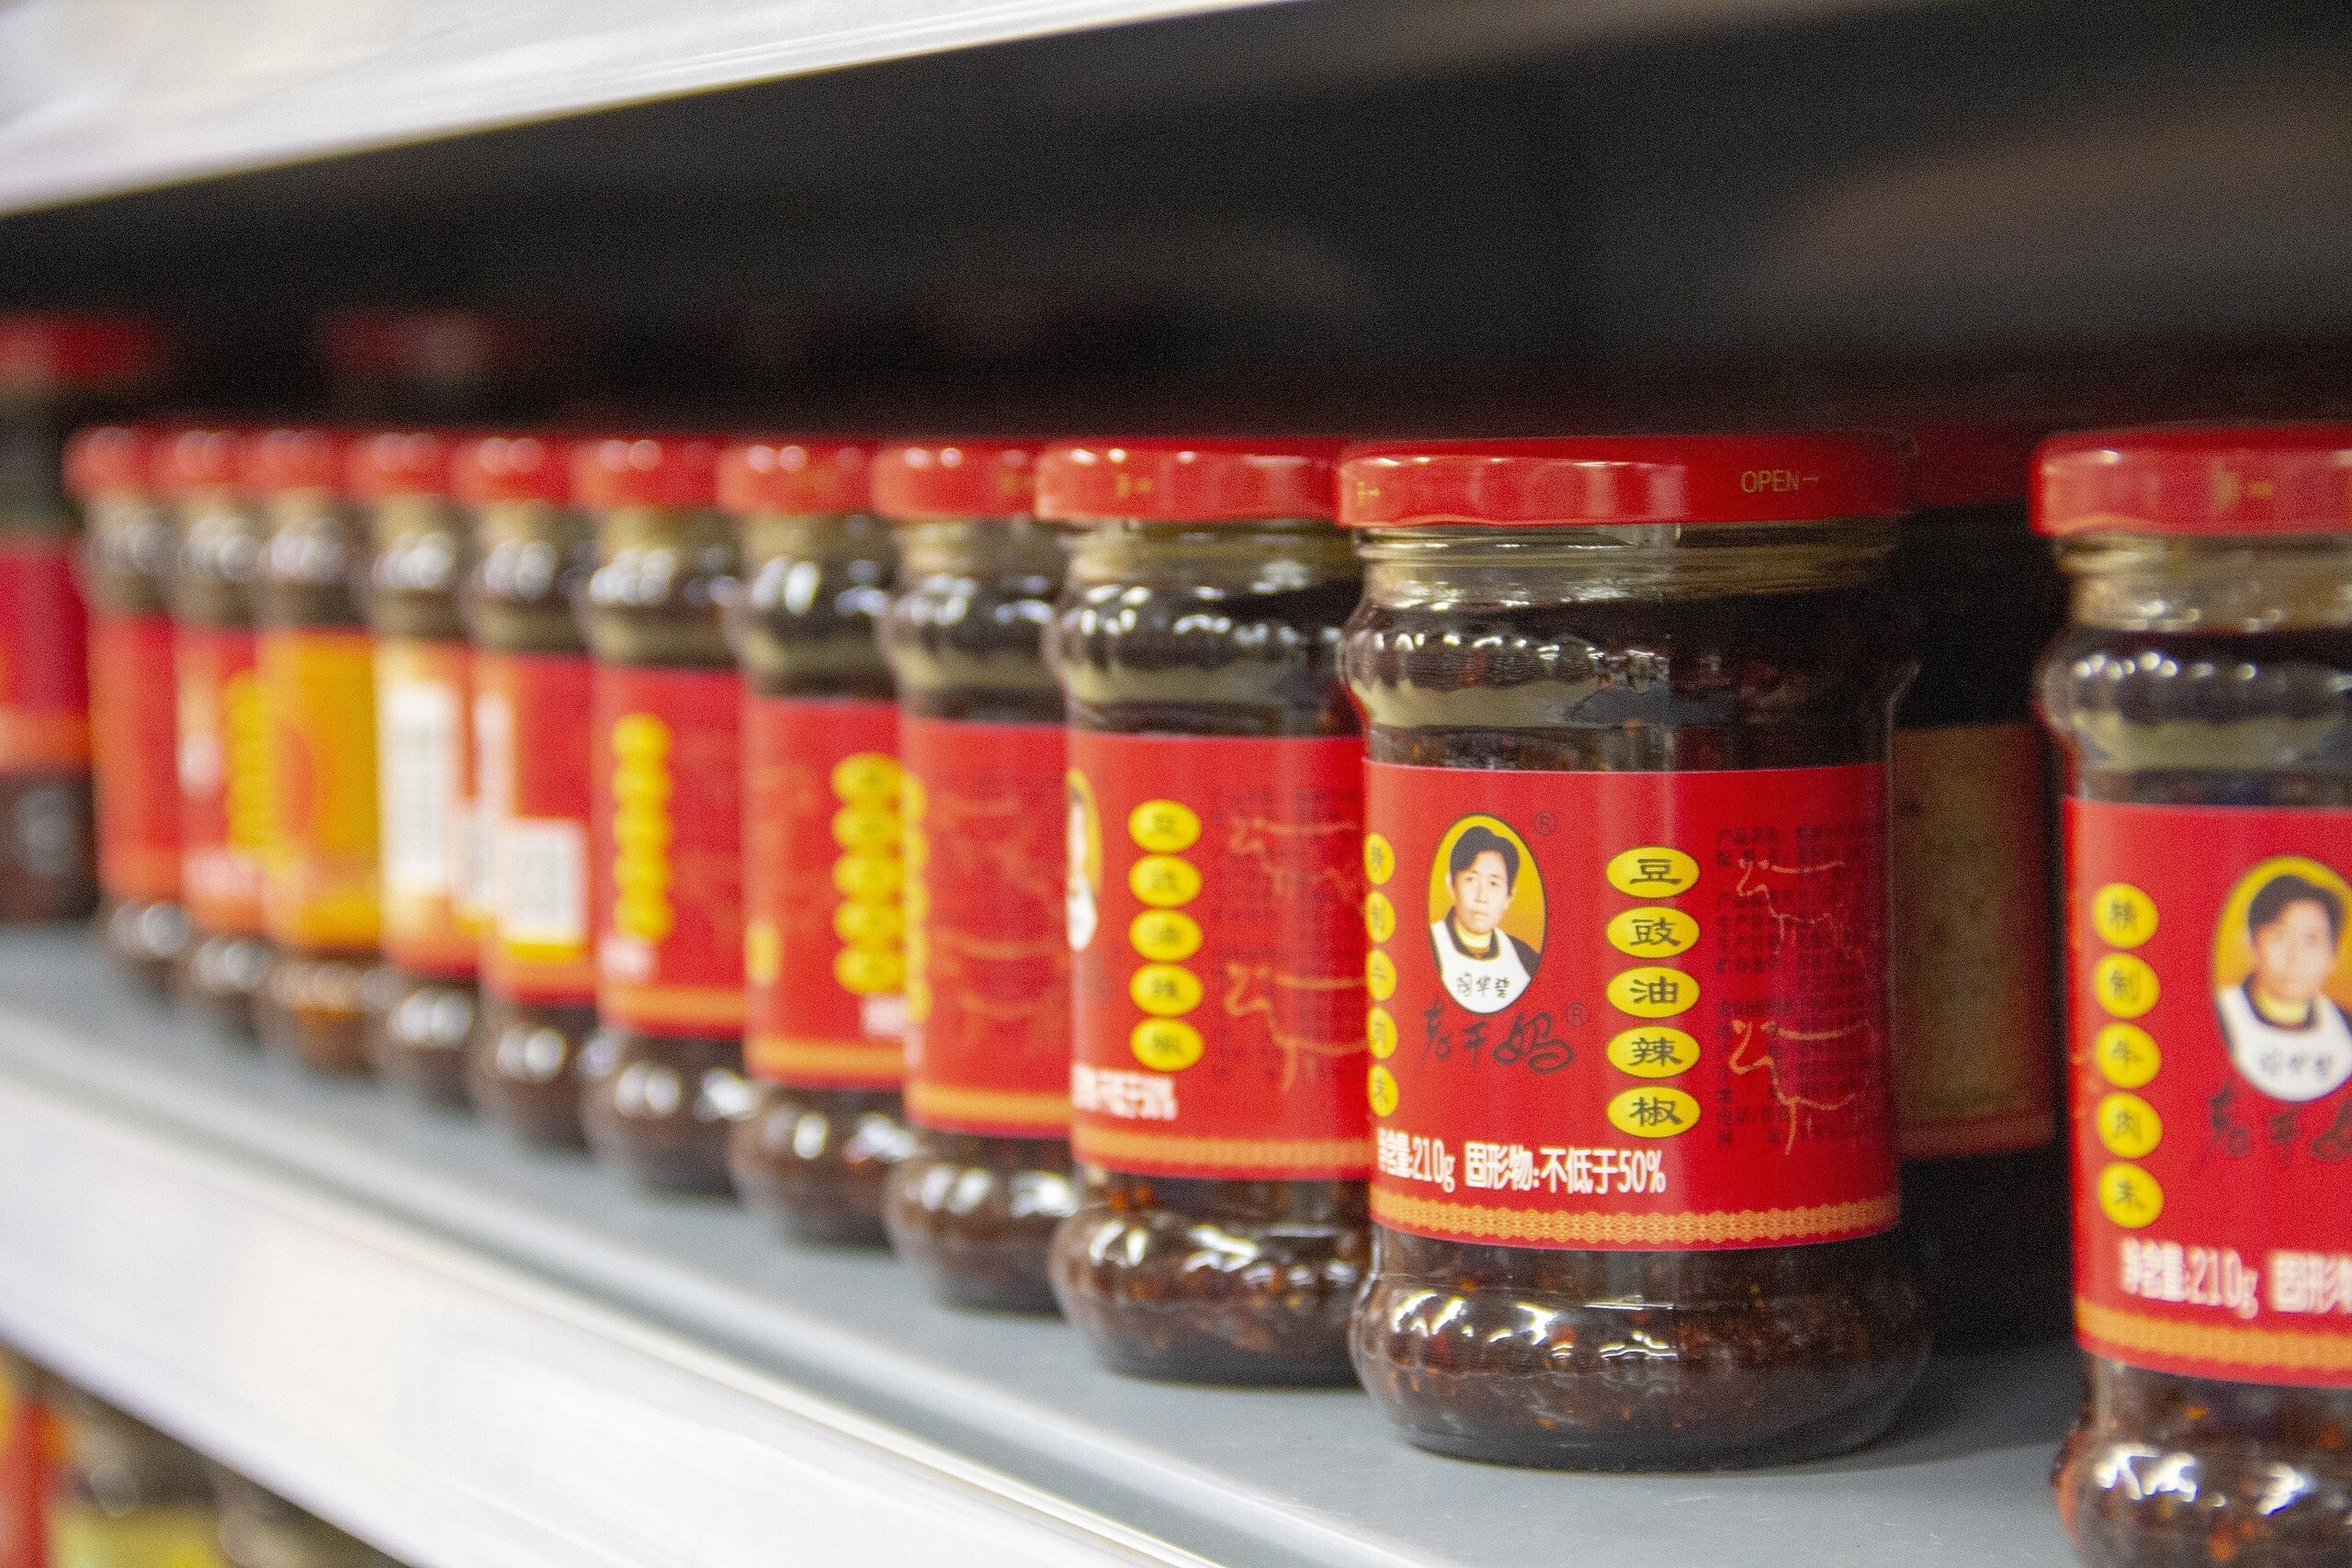 Lao Gan Ma was created by Chinese food stall owner Tao Huabi, whose stern portrait adorns every jar.